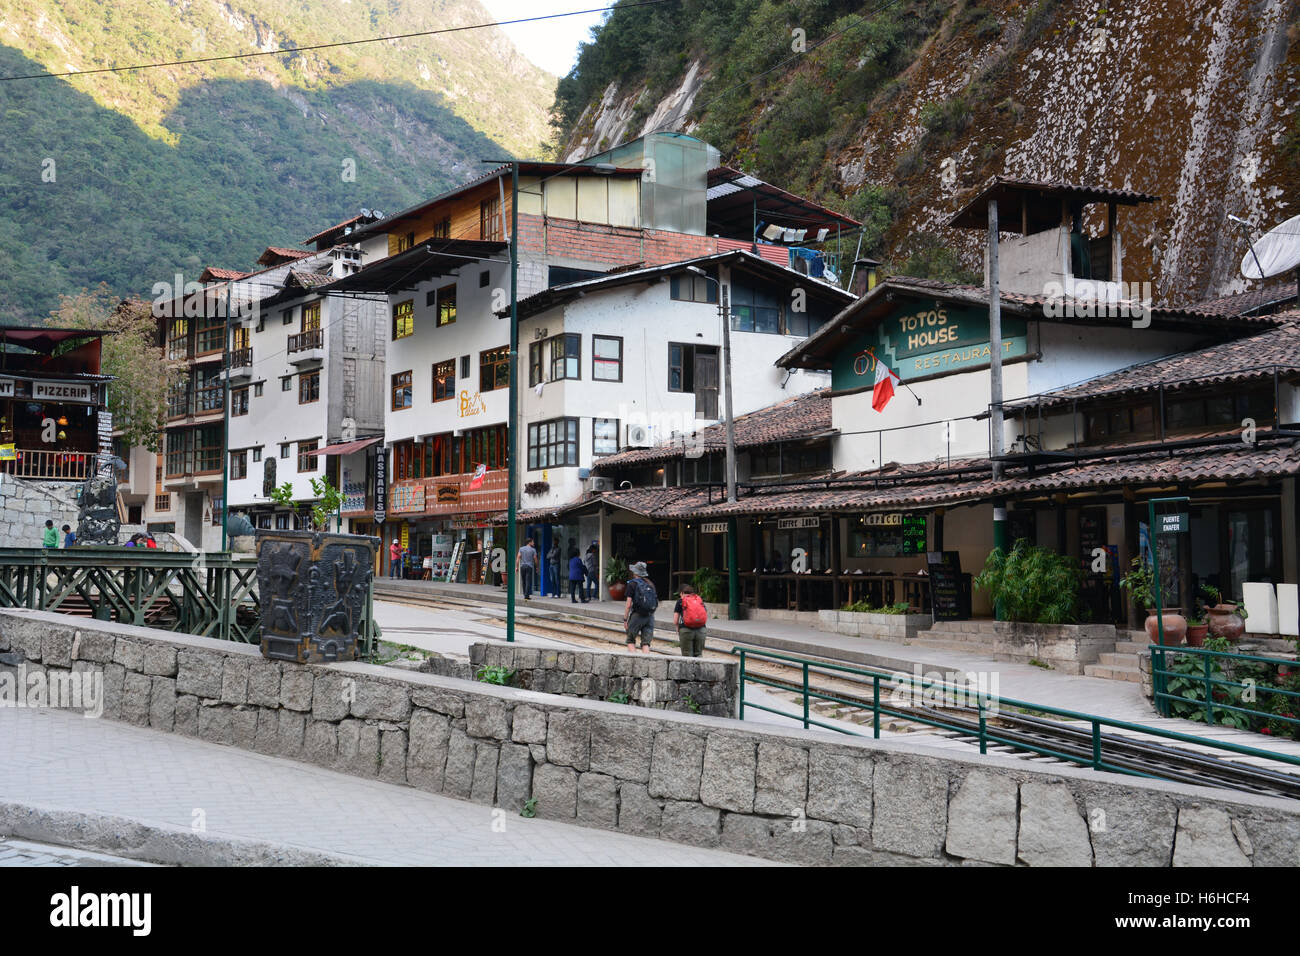 The tourist town of Aguas Calientes at the base of Machu Picchu. Stock Photo